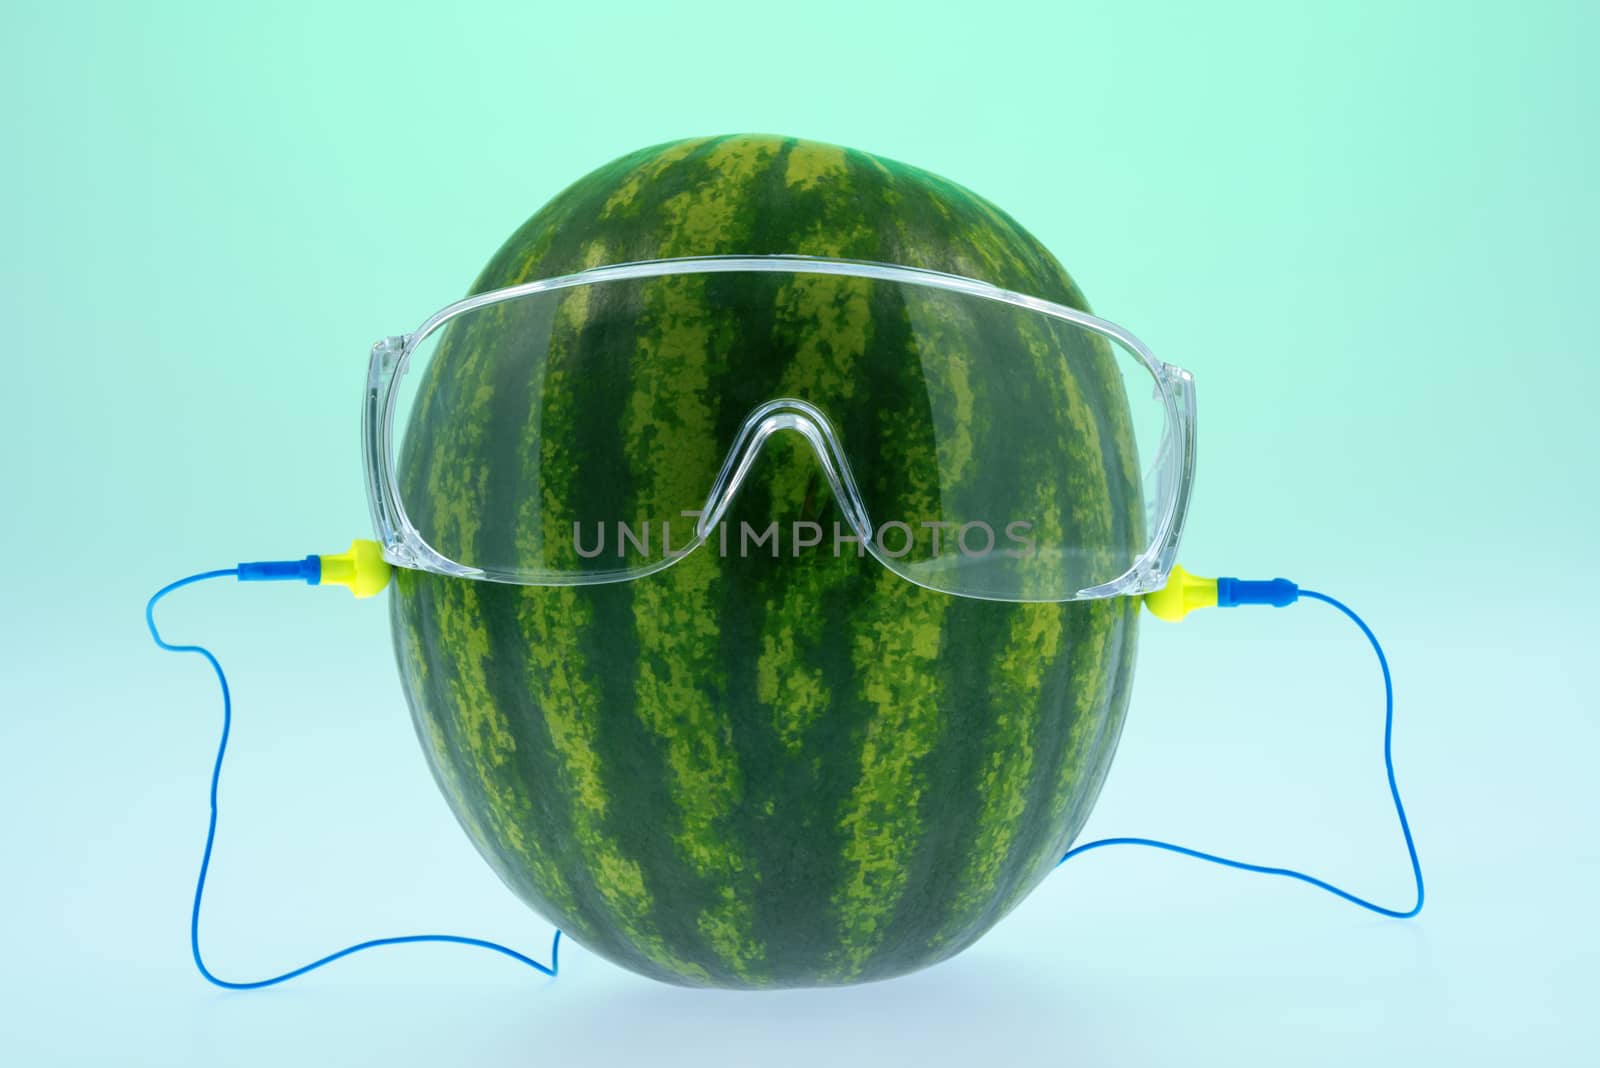 Melon safety glasses and ear plugs composition on green